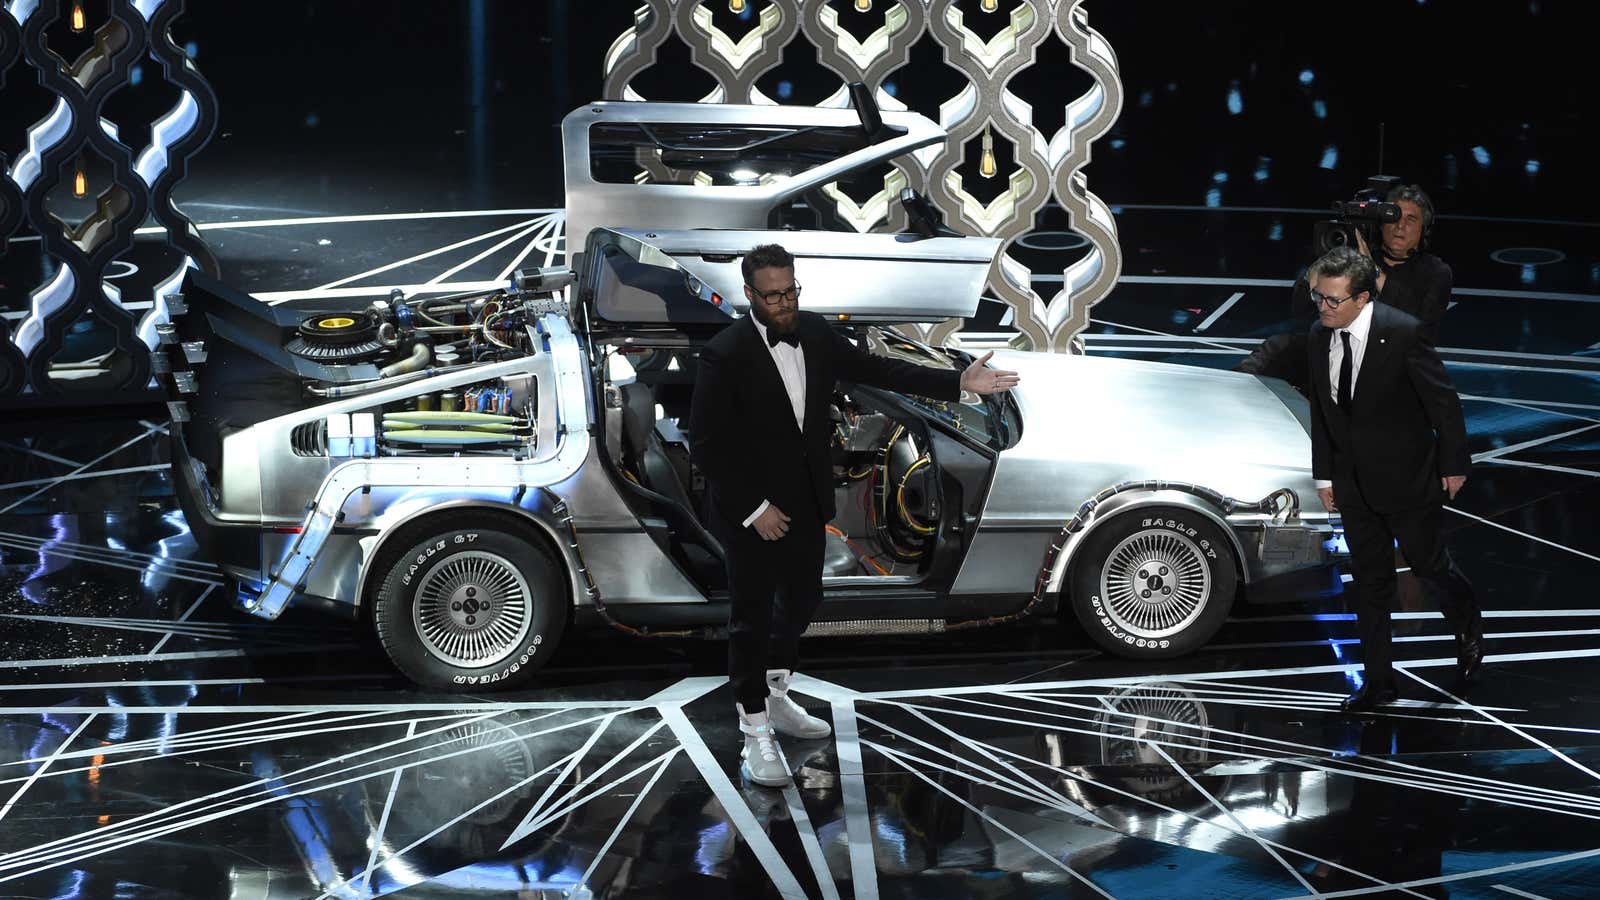 Seth Rogen, Michael J. Fox, and the Nike Mags take the stage at the Oscars.